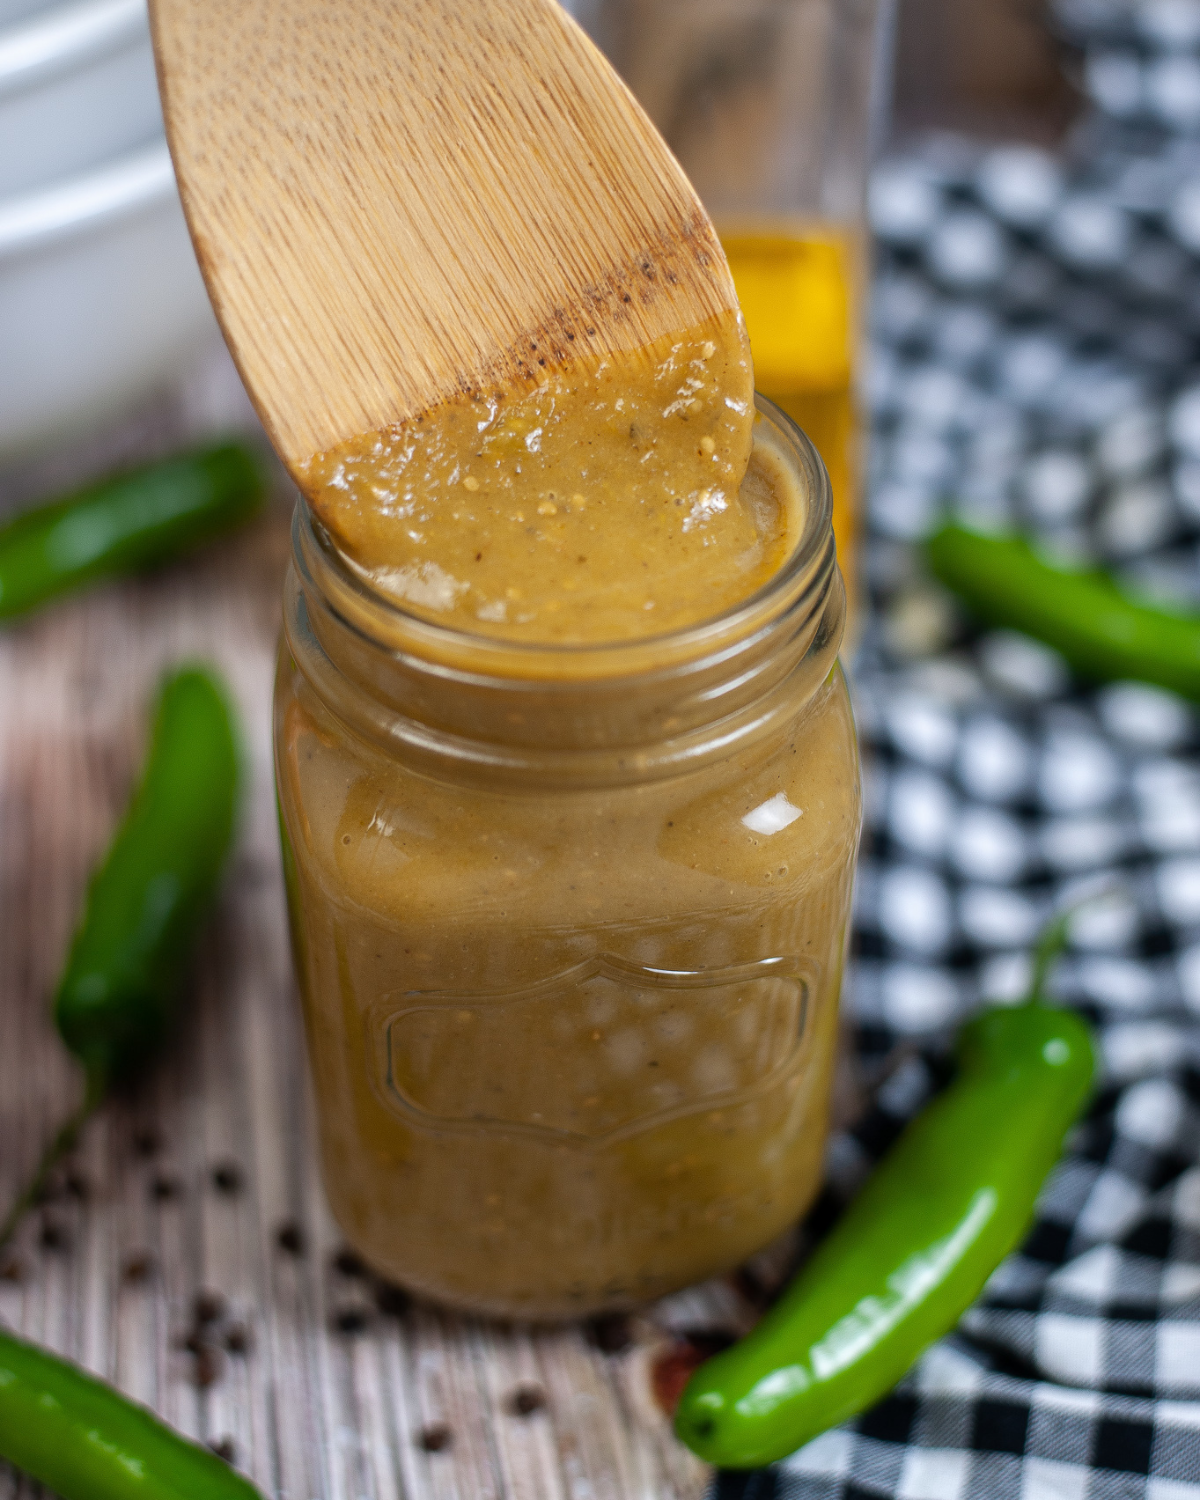 A jar of homemade sauce with a wooden spoon on top.